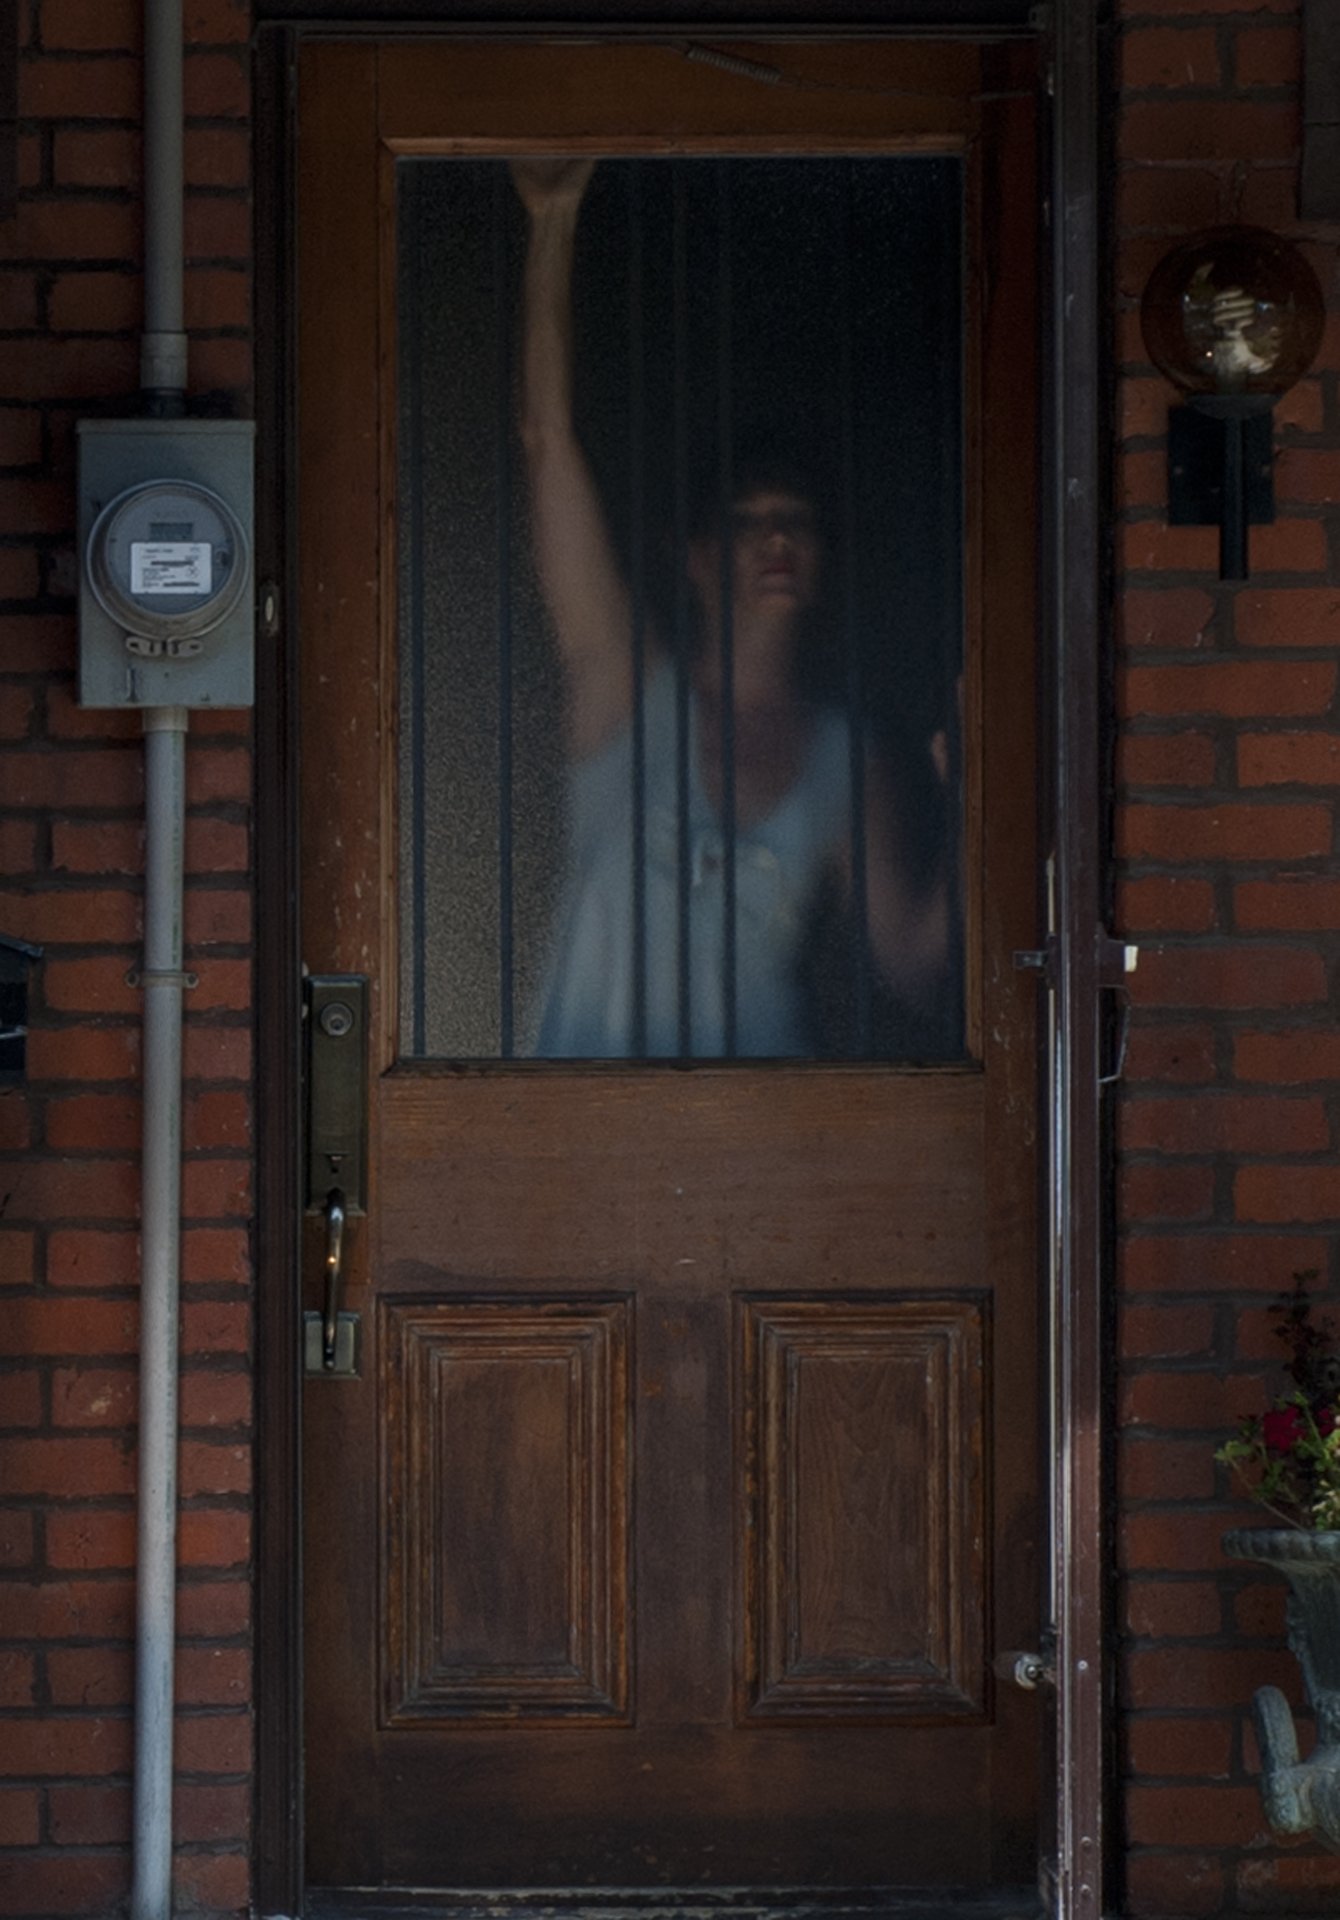 A person seen through the window in a closed front door.